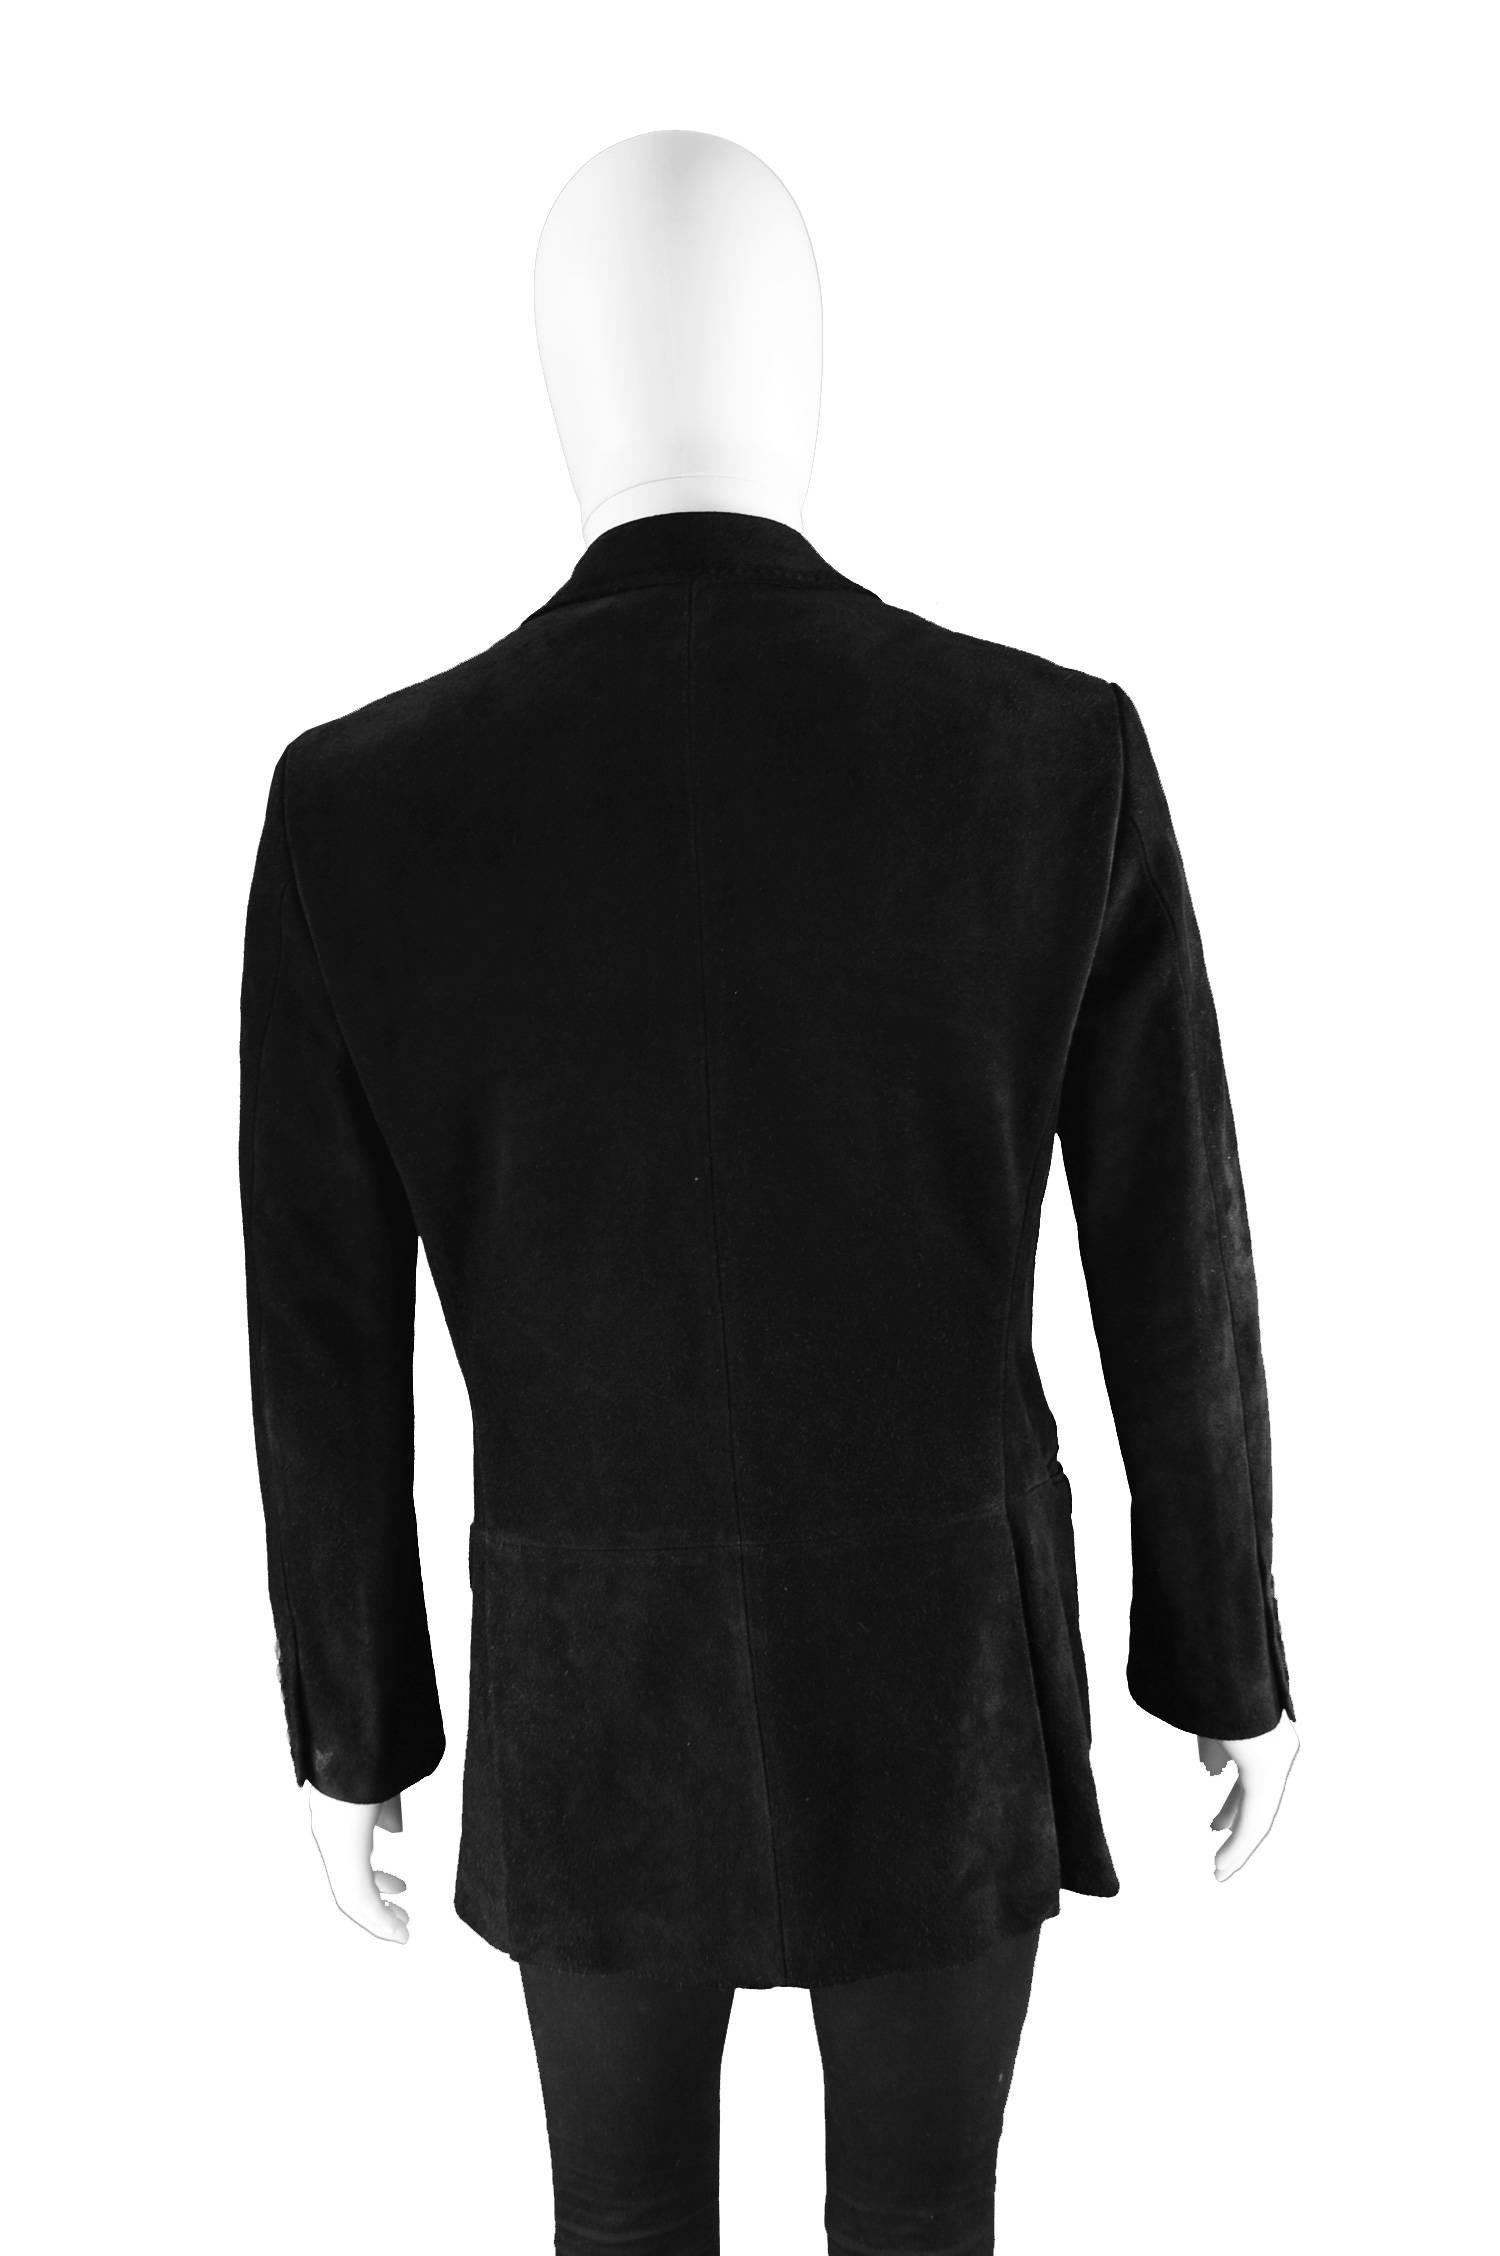 Tom Ford for Gucci Men's Black Suede Blazer with Peaked Lapels, A/W 2002 3